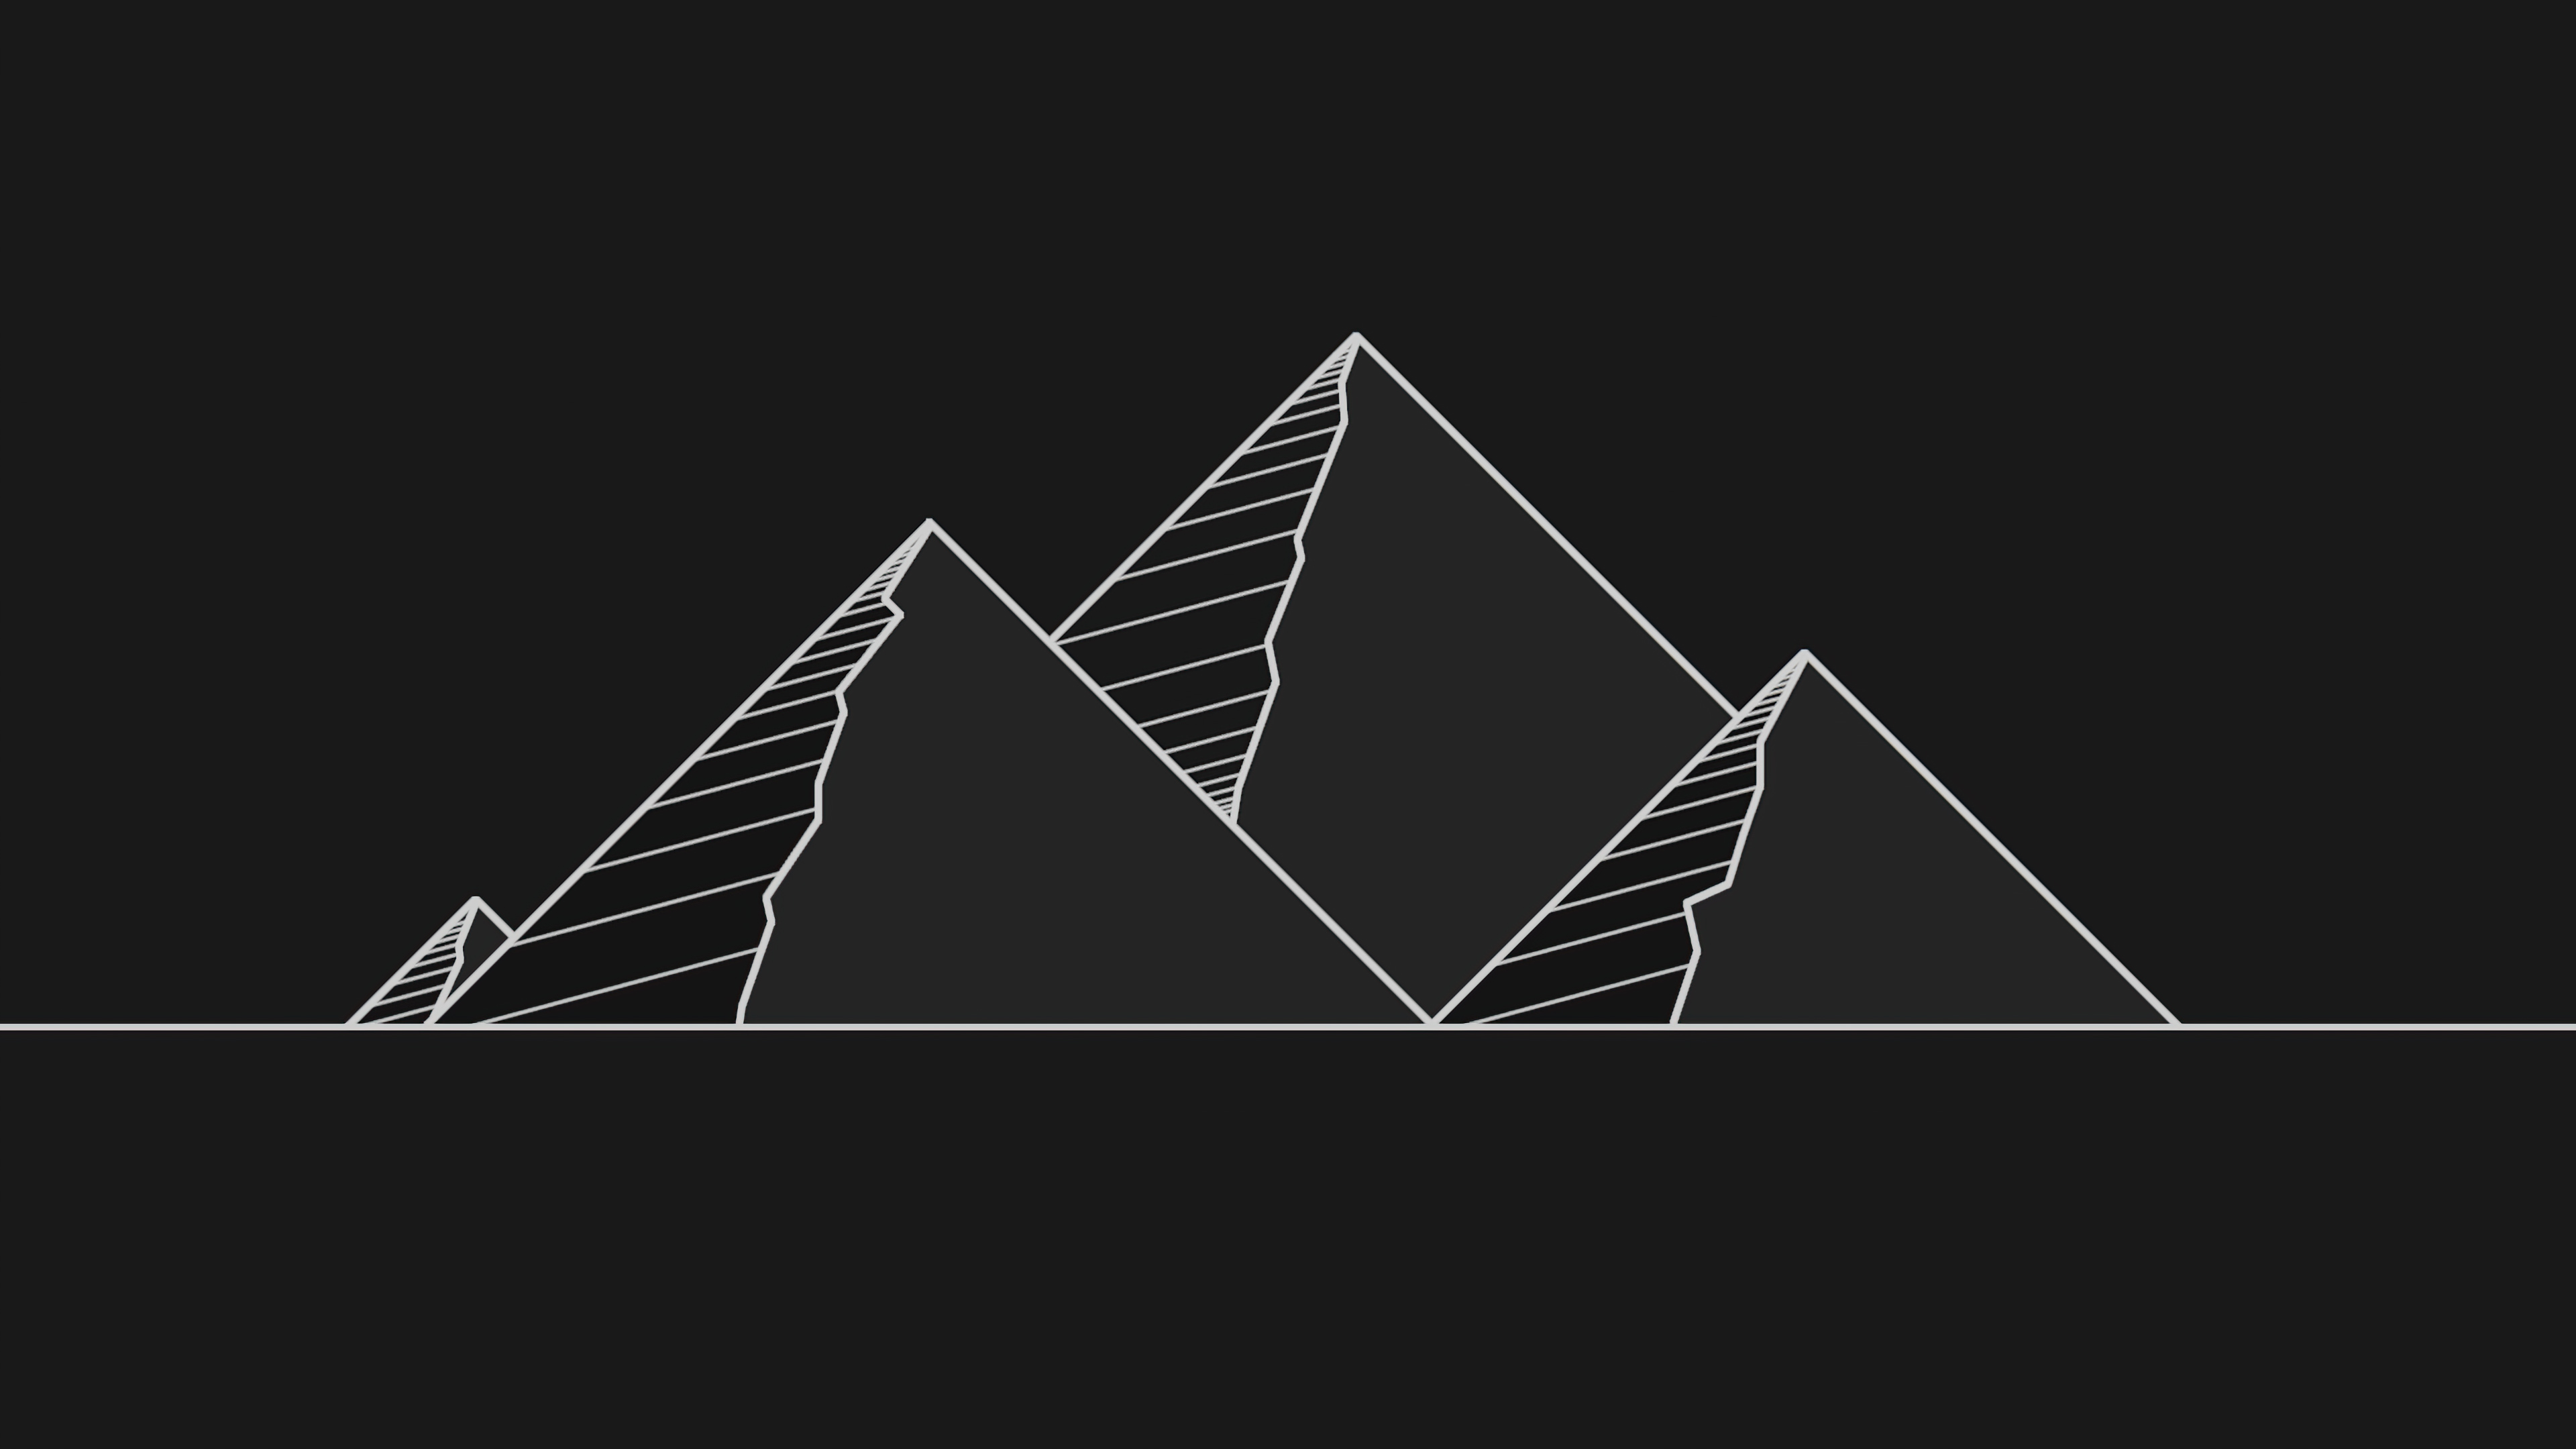 Pyramid Minimal 4k, HD Artist, 4k Wallpaper, Image, Background, Photo and Picture